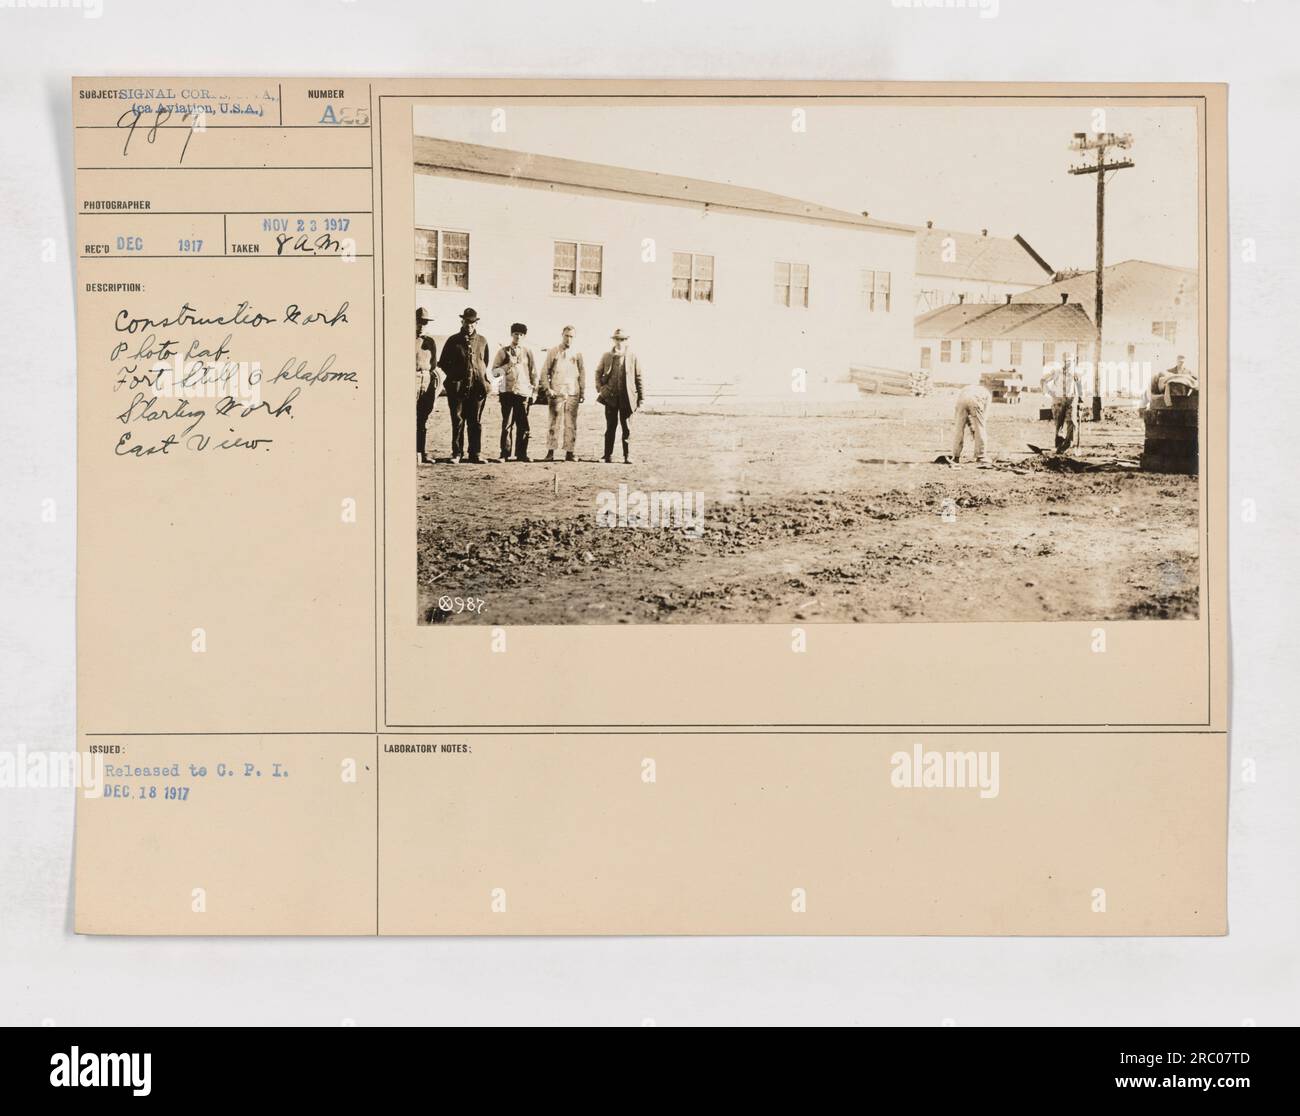 'Image of the construction site of the Photo Lab at Fort Sill, Oklahoma. The photo was taken in 1917 and shows the initial stages of construction. The view captured is from the east side. This image was released on December 18, 1917, and is marked as 111-SC-987 in the collection.' Stock Photo